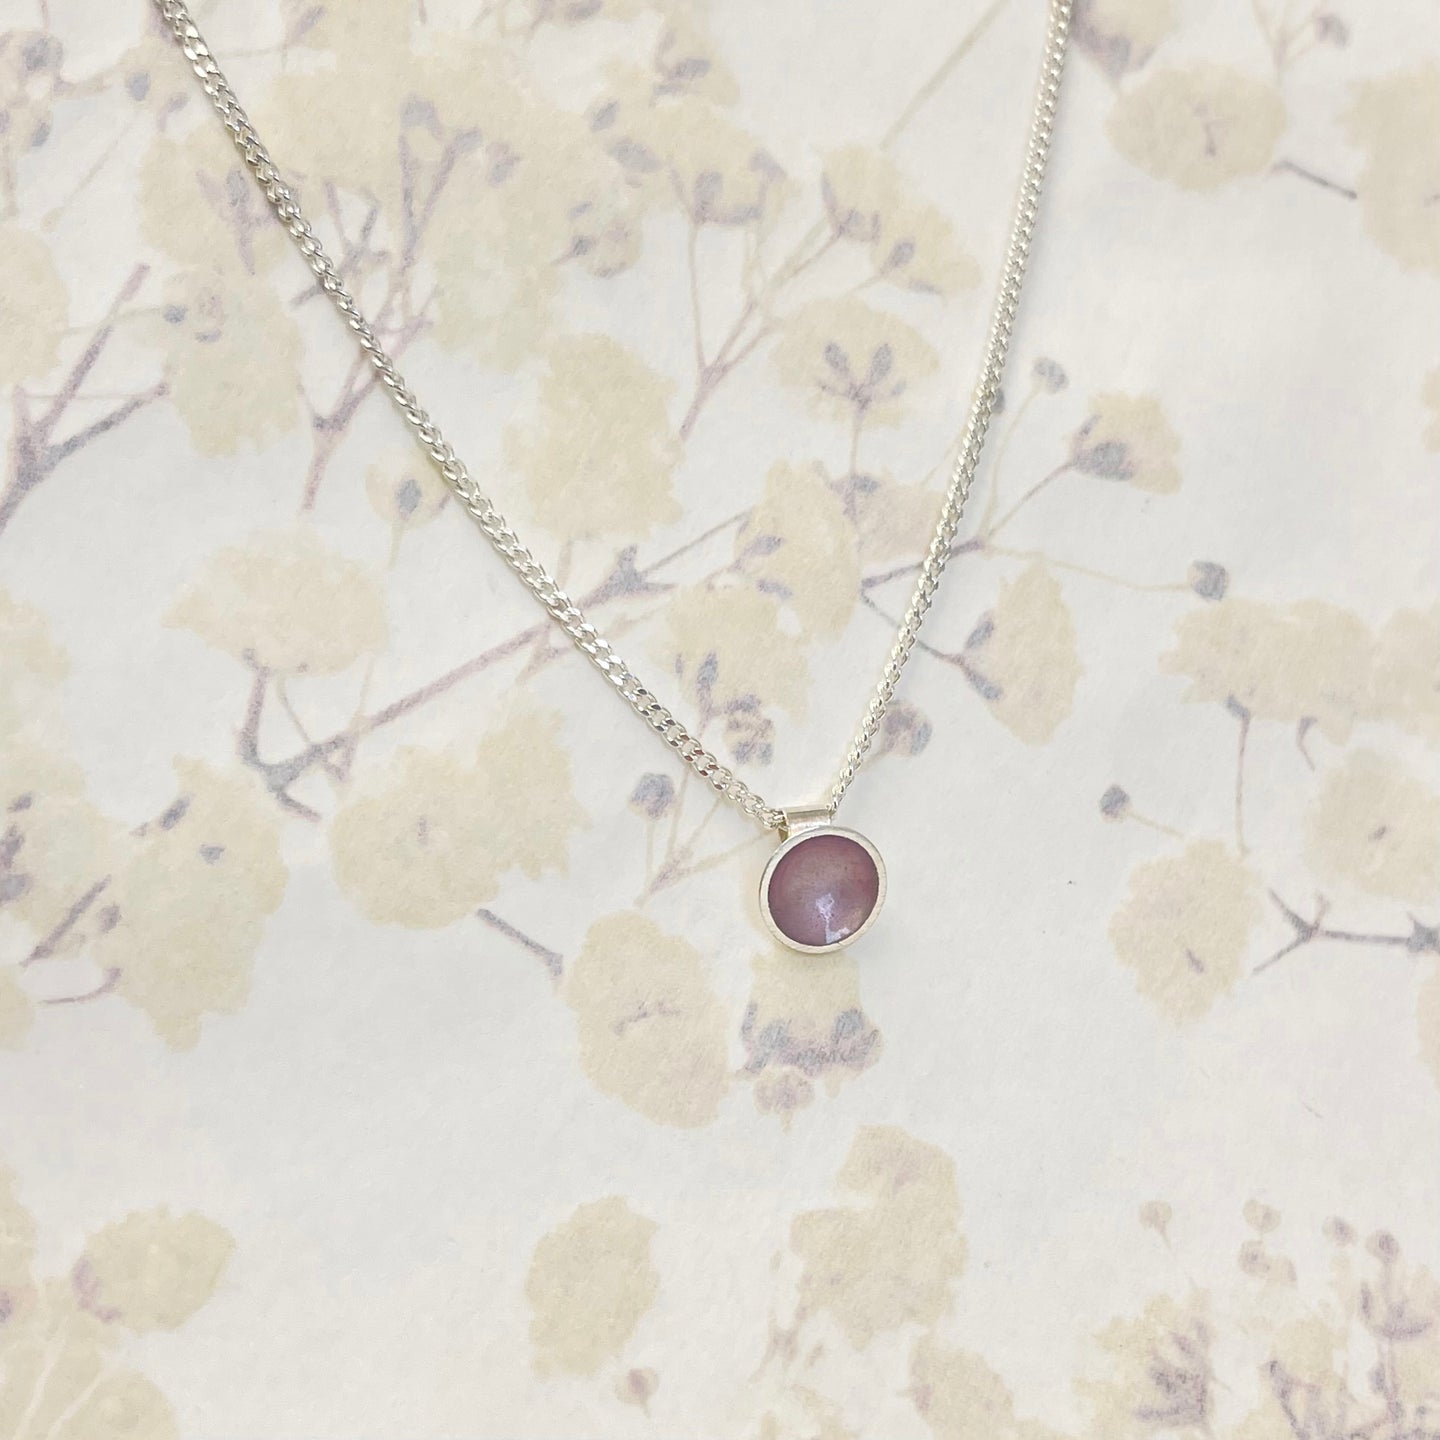 Tiny silver and pale pink enamel necklace